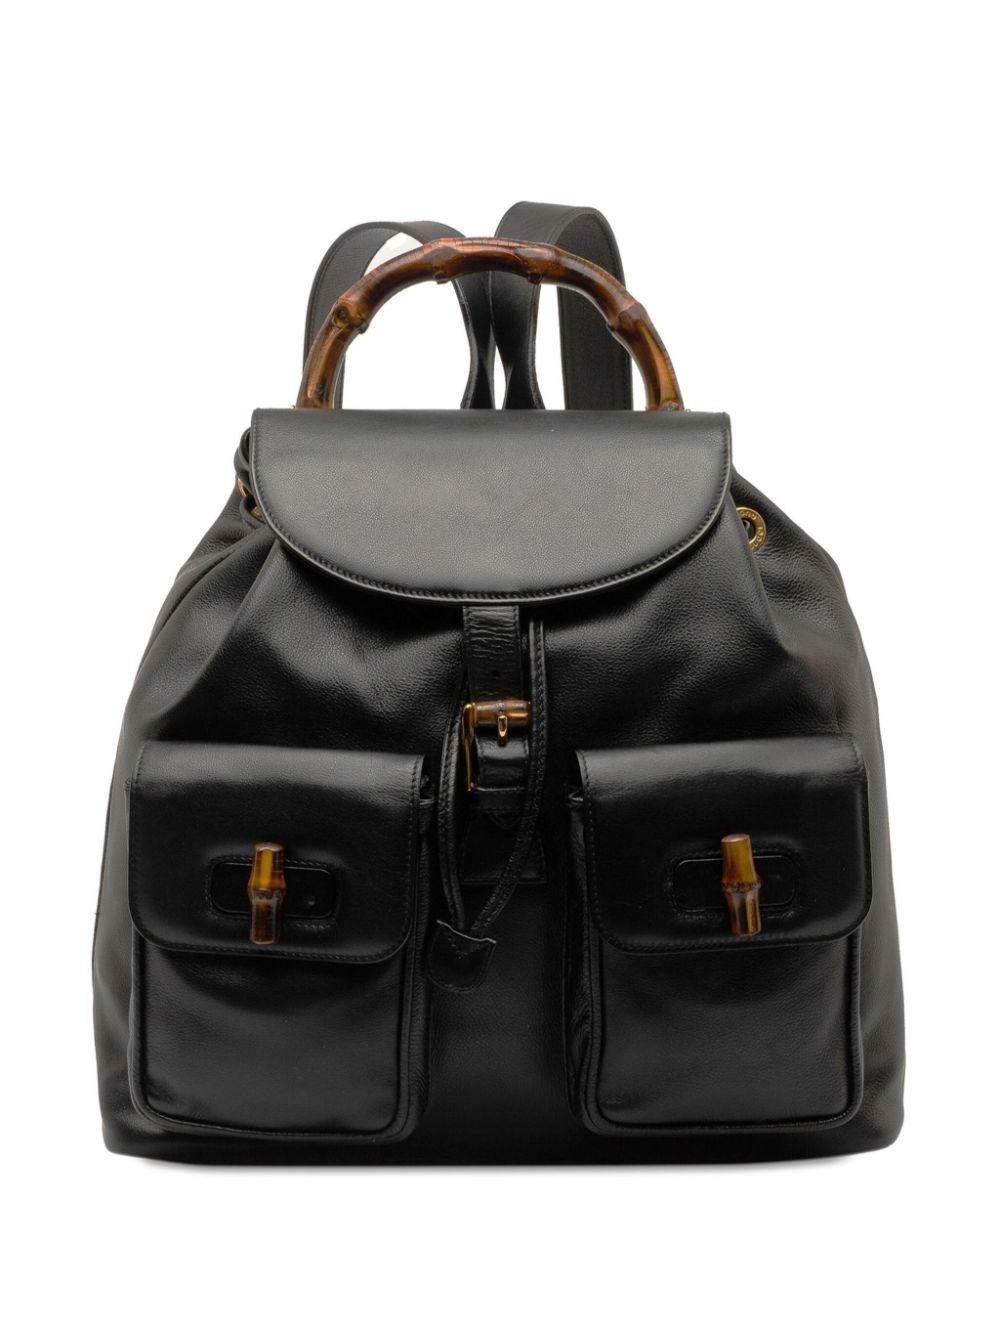 2000-2015 Bamboo leather backpack